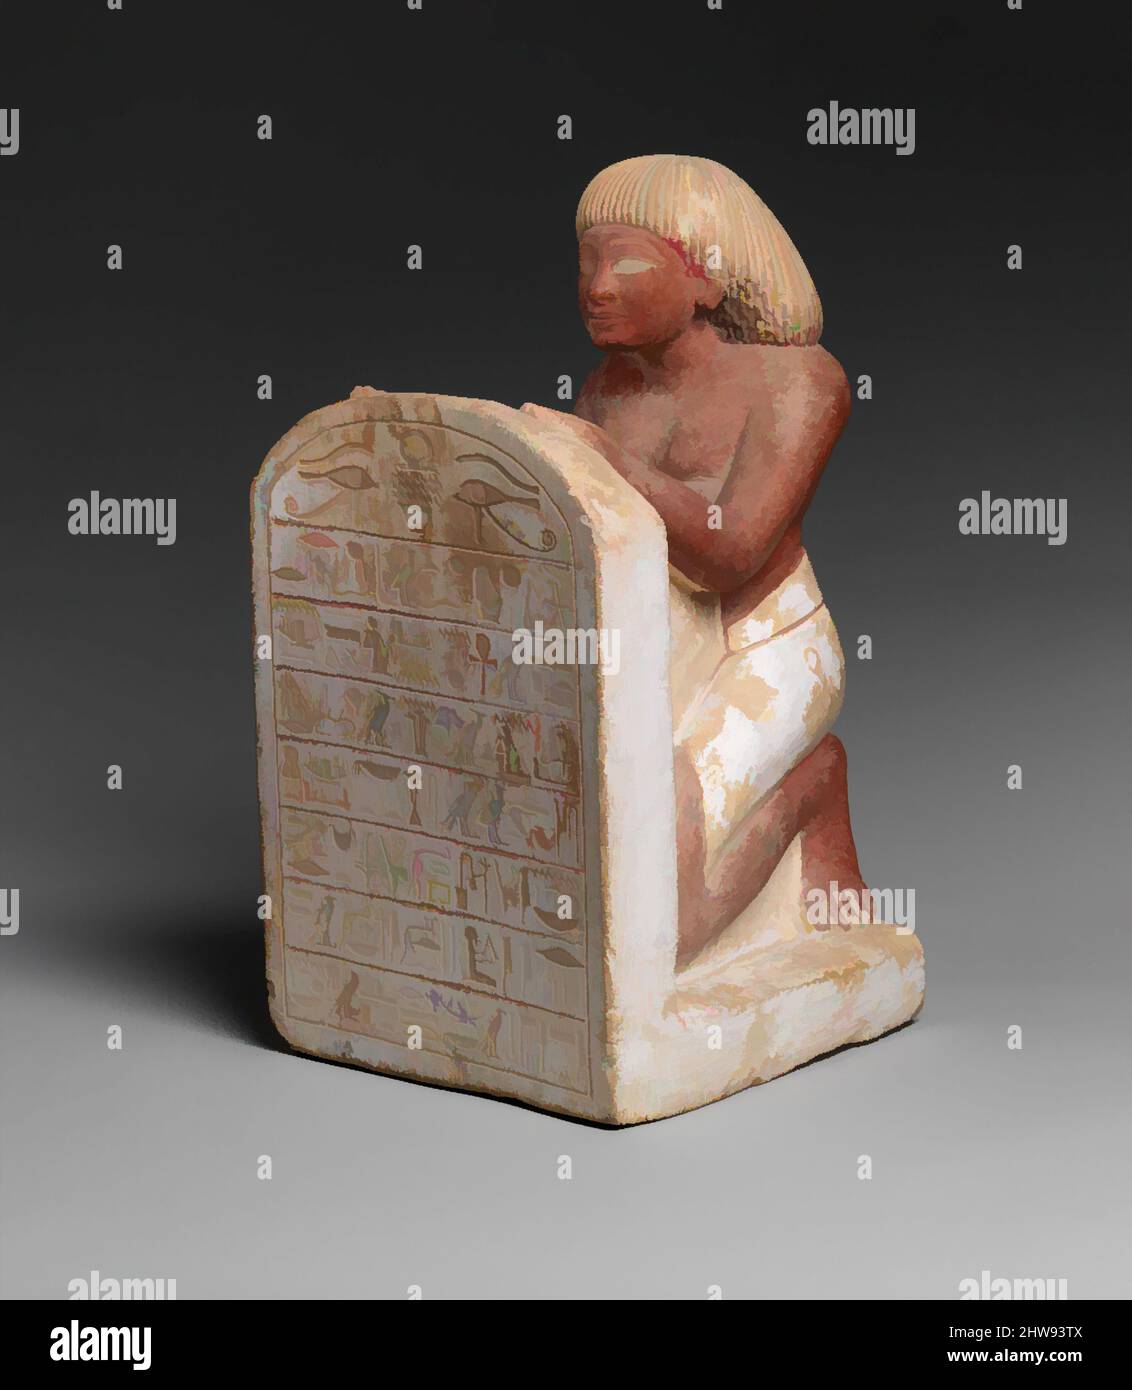 Art inspired by Statue of Roy Chanting the Solar Hymn Written on His Stela, New Kingdom, Dynasty 18, ca. 1427–1400 B.C., From Egypt, Upper Egypt, Thebes, Limestone, paint, H. 31.5 × w. 16.3 × d. 19 cm (12 3/8 × 6 7/16 × 7 1/2 in. ), The scribe Roy holds a stela inscribed with a hymn to, Classic works modernized by Artotop with a splash of modernity. Shapes, color and value, eye-catching visual impact on art. Emotions through freedom of artworks in a contemporary way. A timeless message pursuing a wildly creative new direction. Artists turning to the digital medium and creating the Artotop NFT Stock Photo